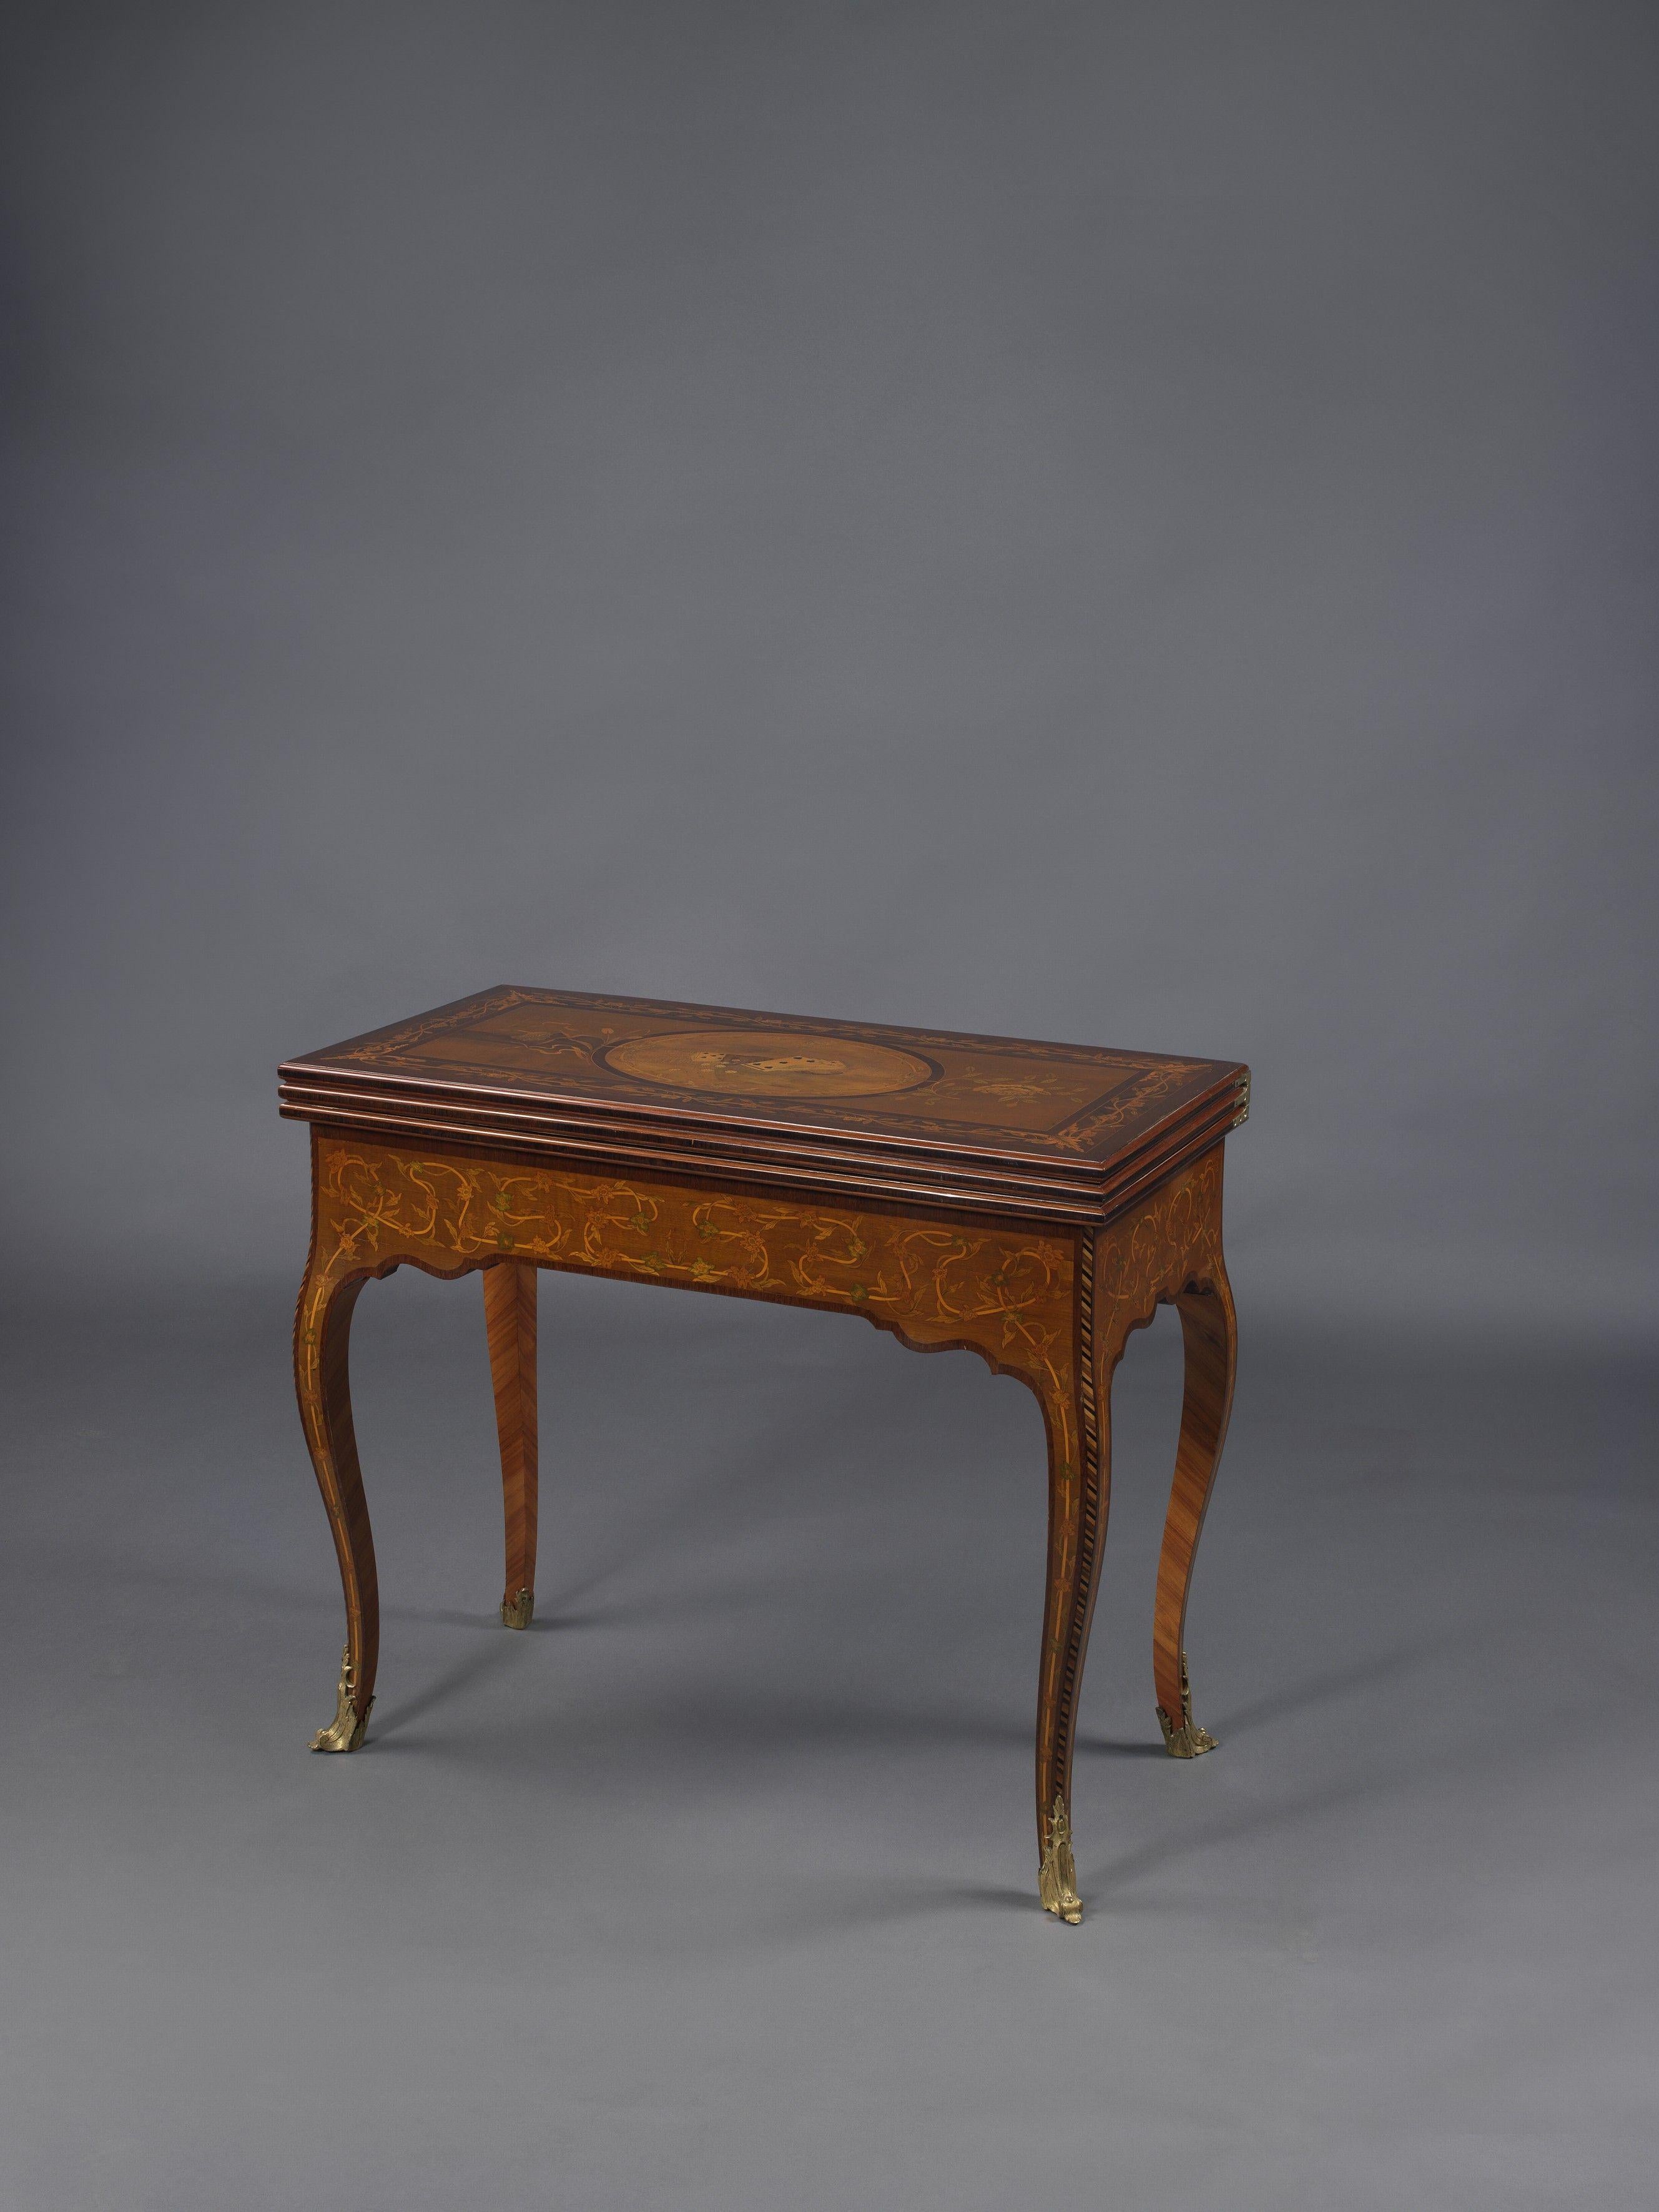 A rare and highly important Russian imperial period gilt-bronze mounted and marquetry inlaid, triple turn-over games table.
 
St. Petersburg, circa 1820.

This rare and elegant marquetry games table, or Lomberian, is representative of the golden